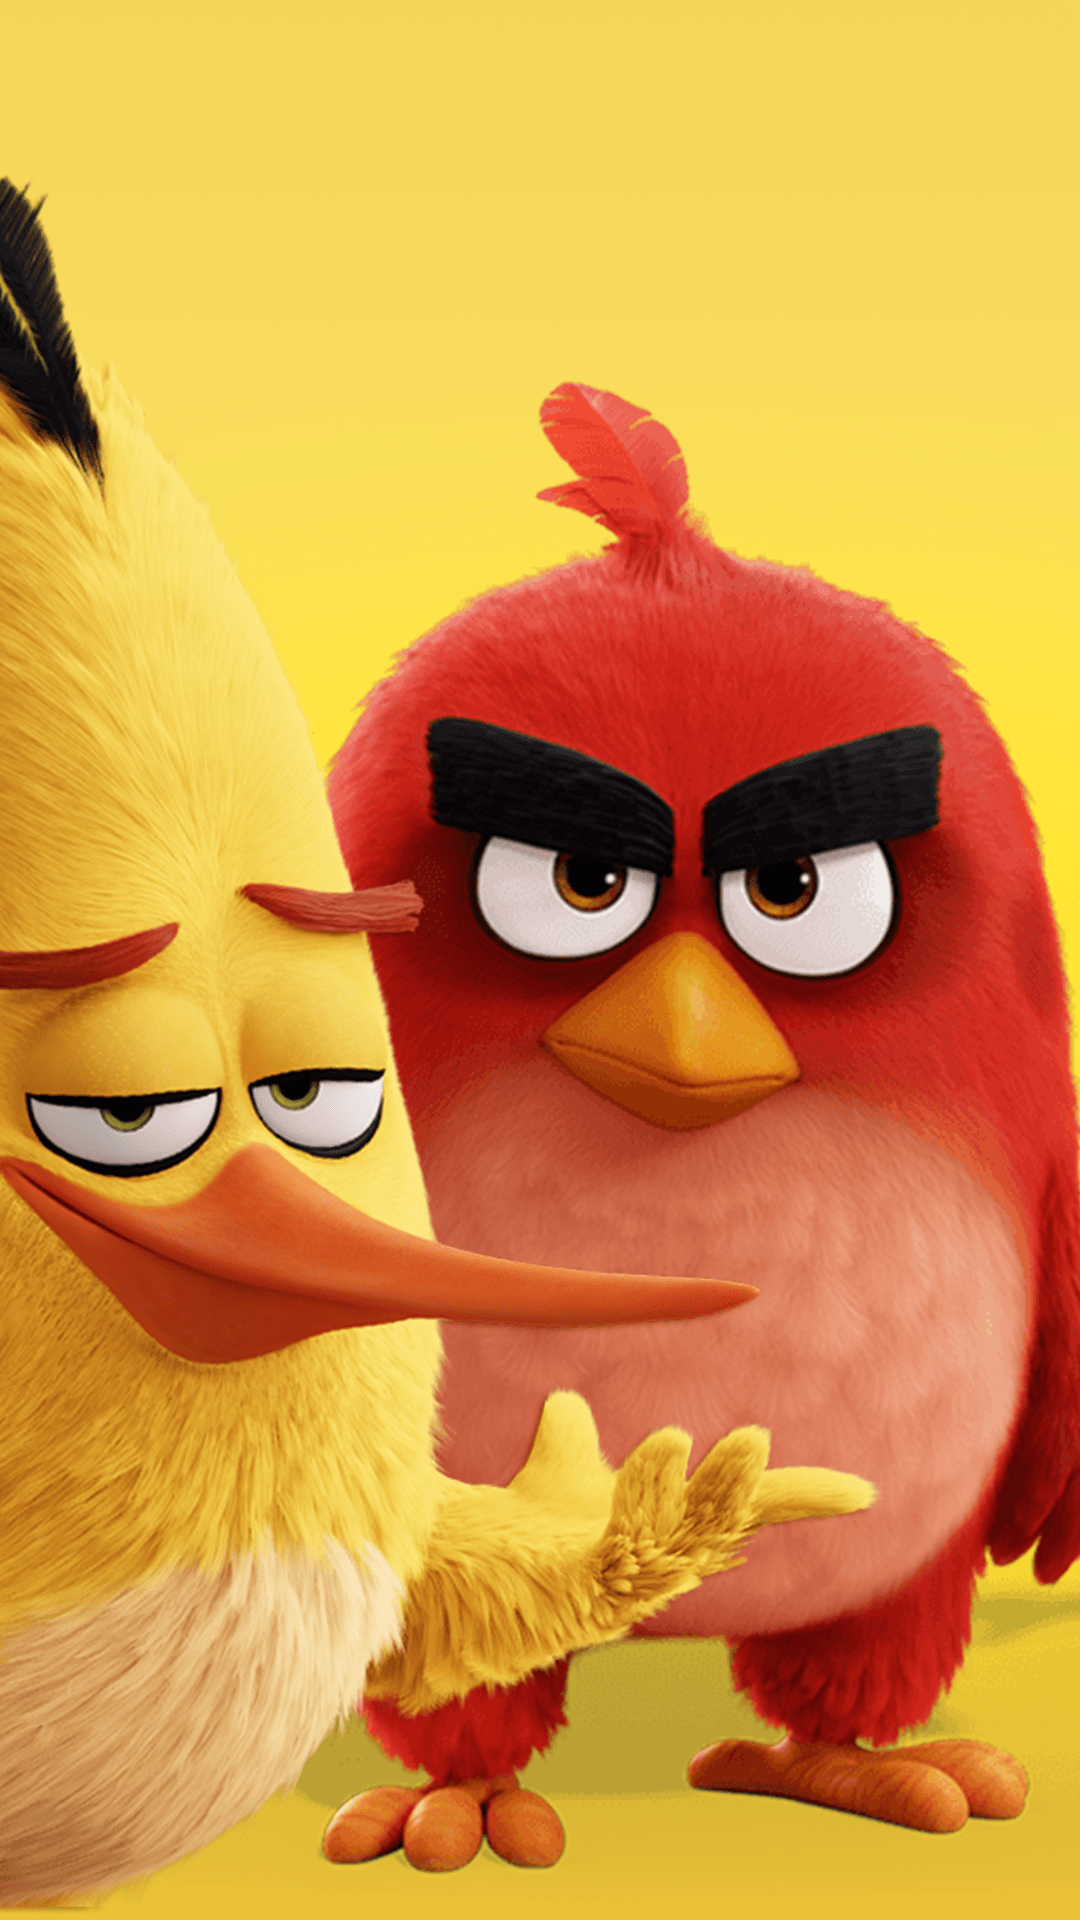 Free Hd Angry Birds Iphone Wallpaper For Download - Angry Birds Wallpaper Hd - HD Wallpaper 